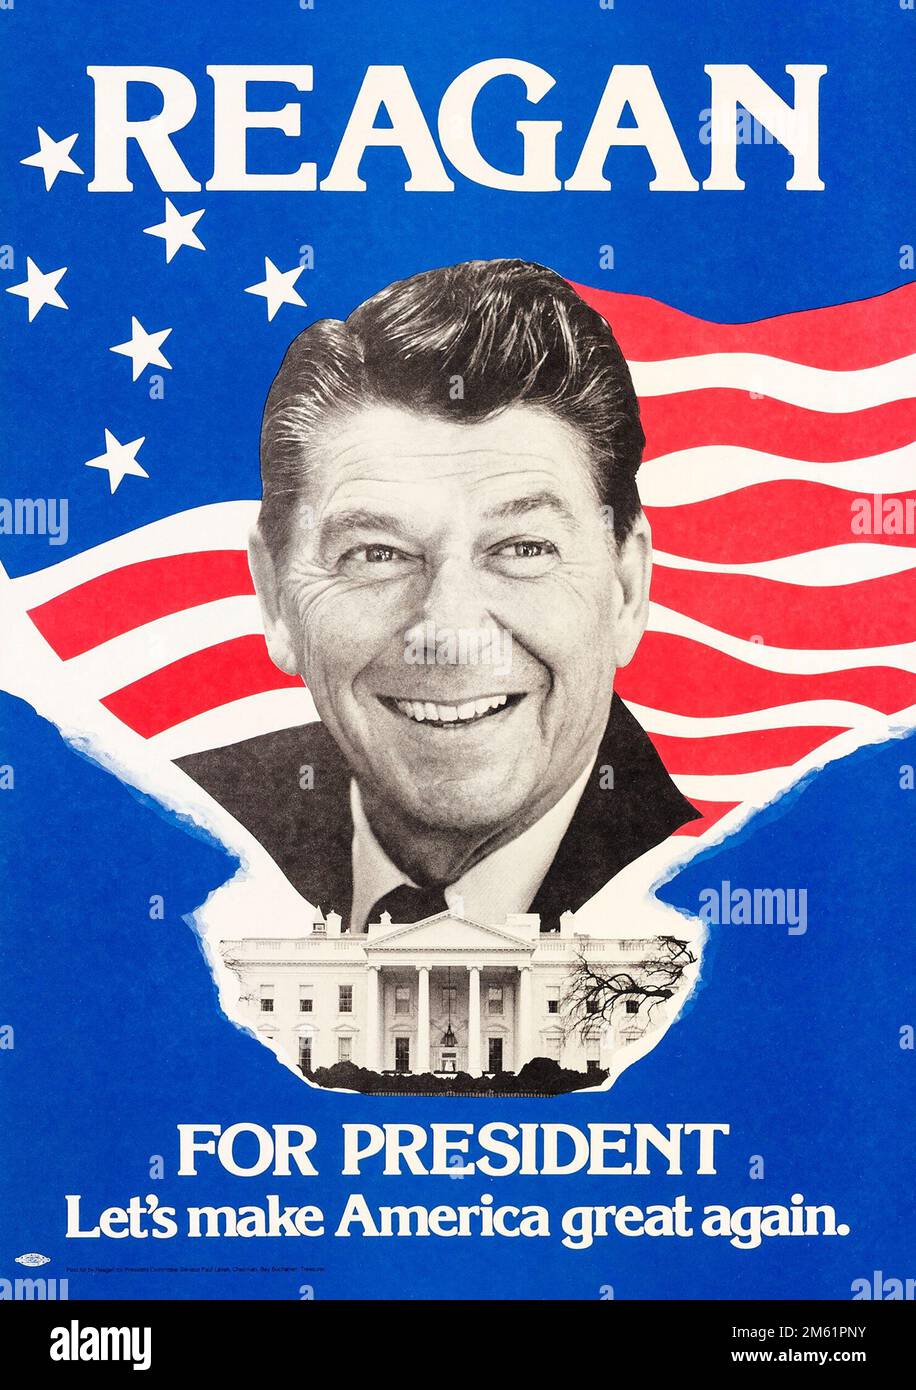 Ronald Reagan campaign poster - political - 1980. Lets make America great again Stock Photo